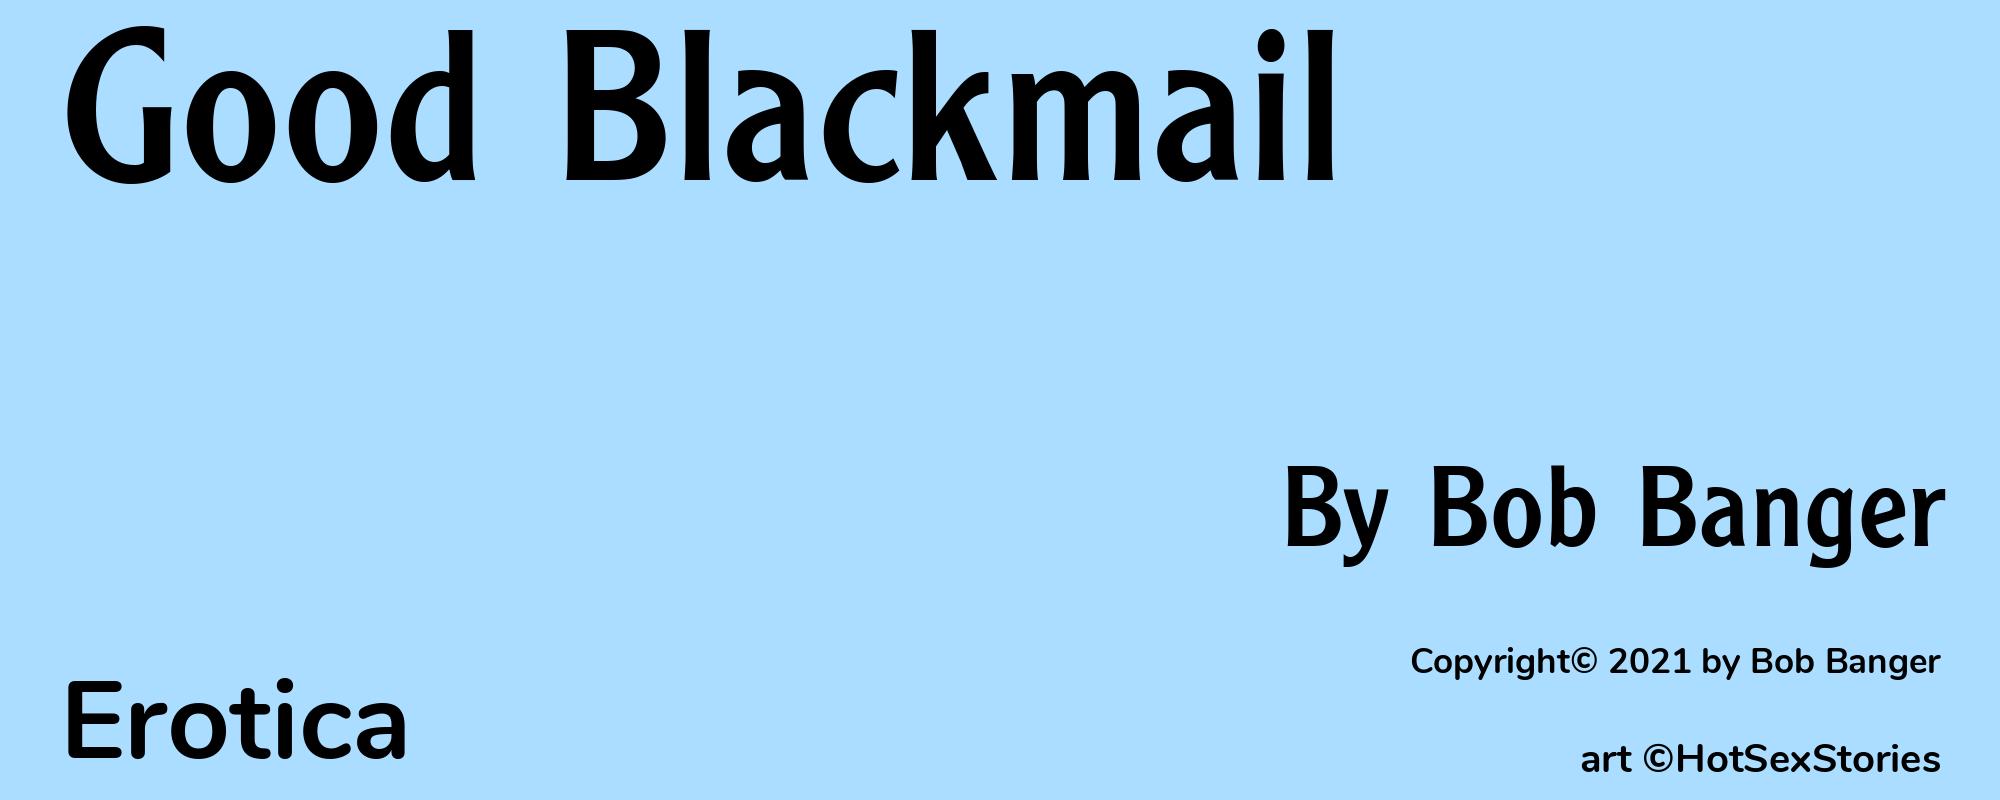 Good Blackmail - Cover